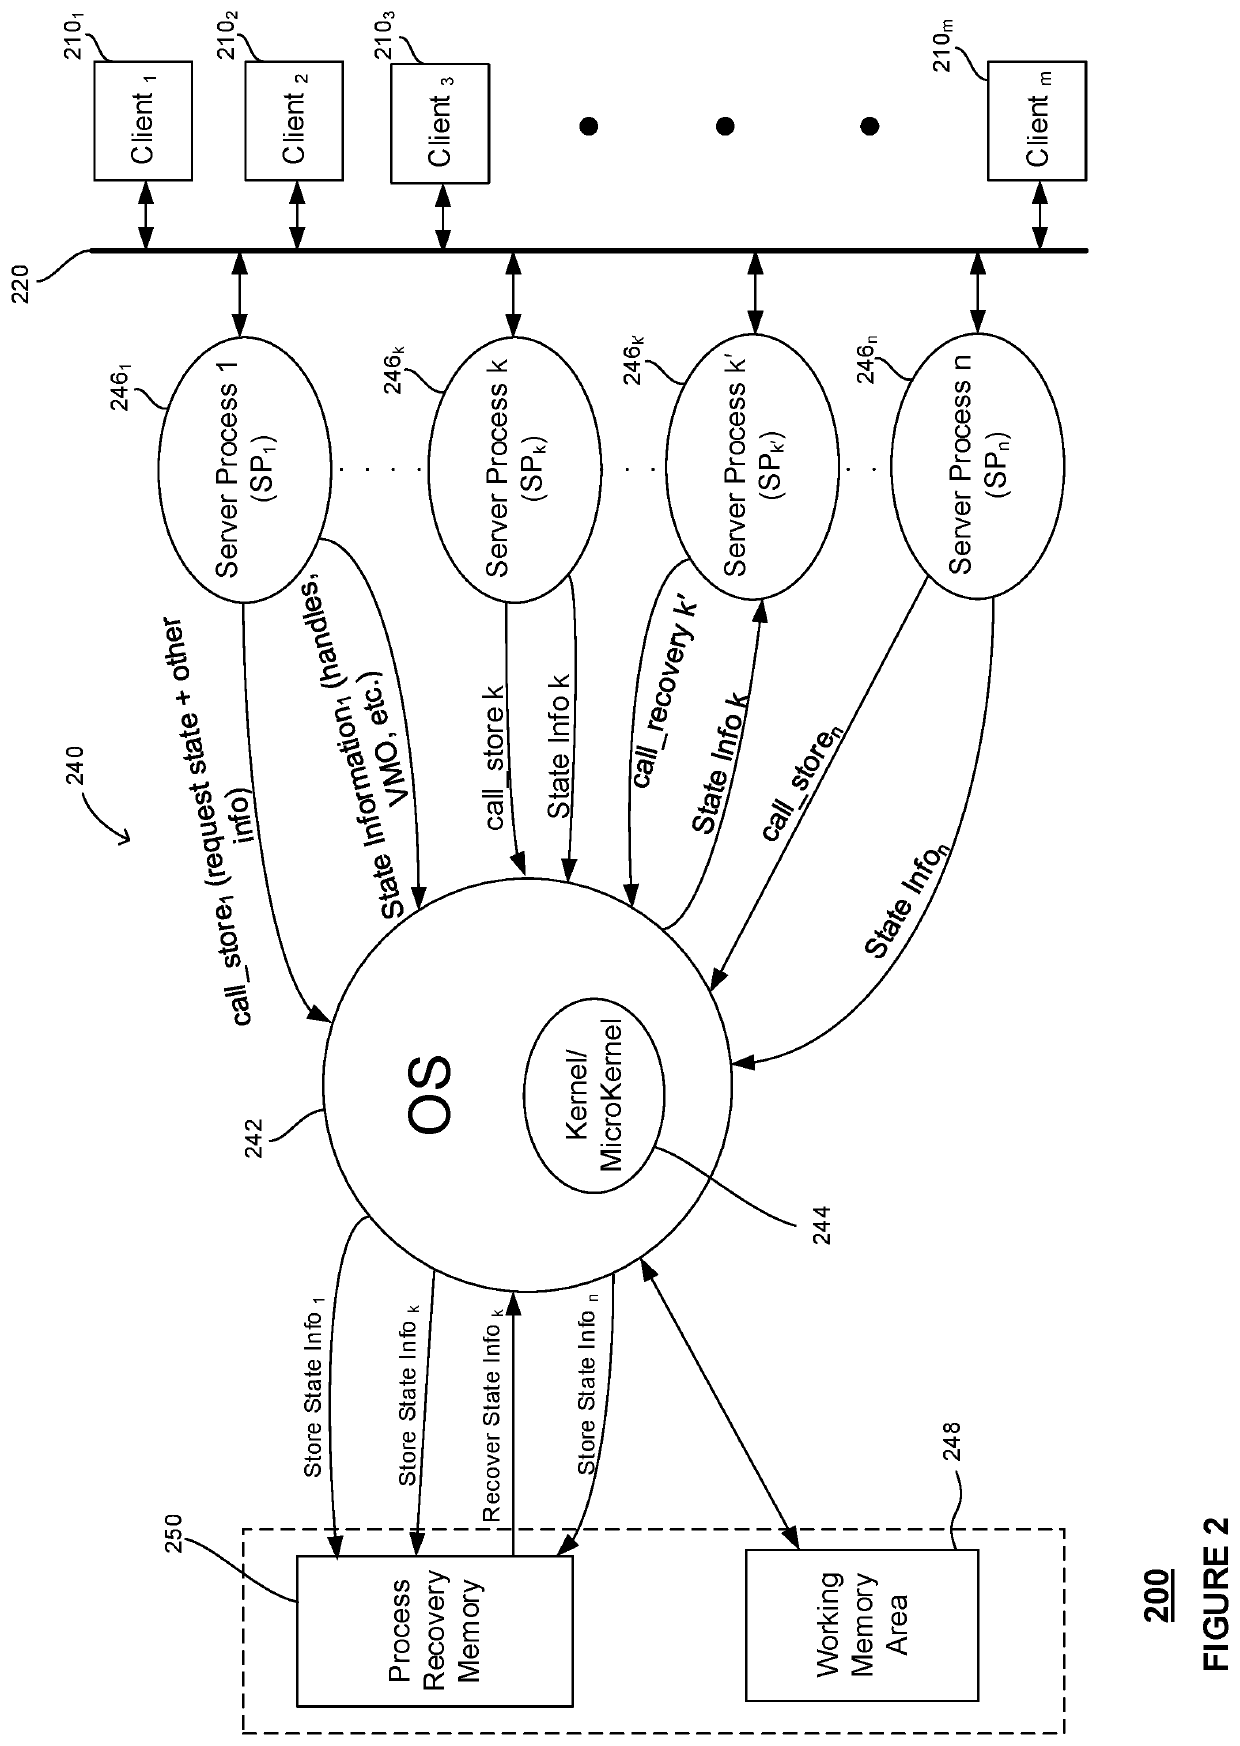 Transferral Of Process State And/Or Components In Computing Environments